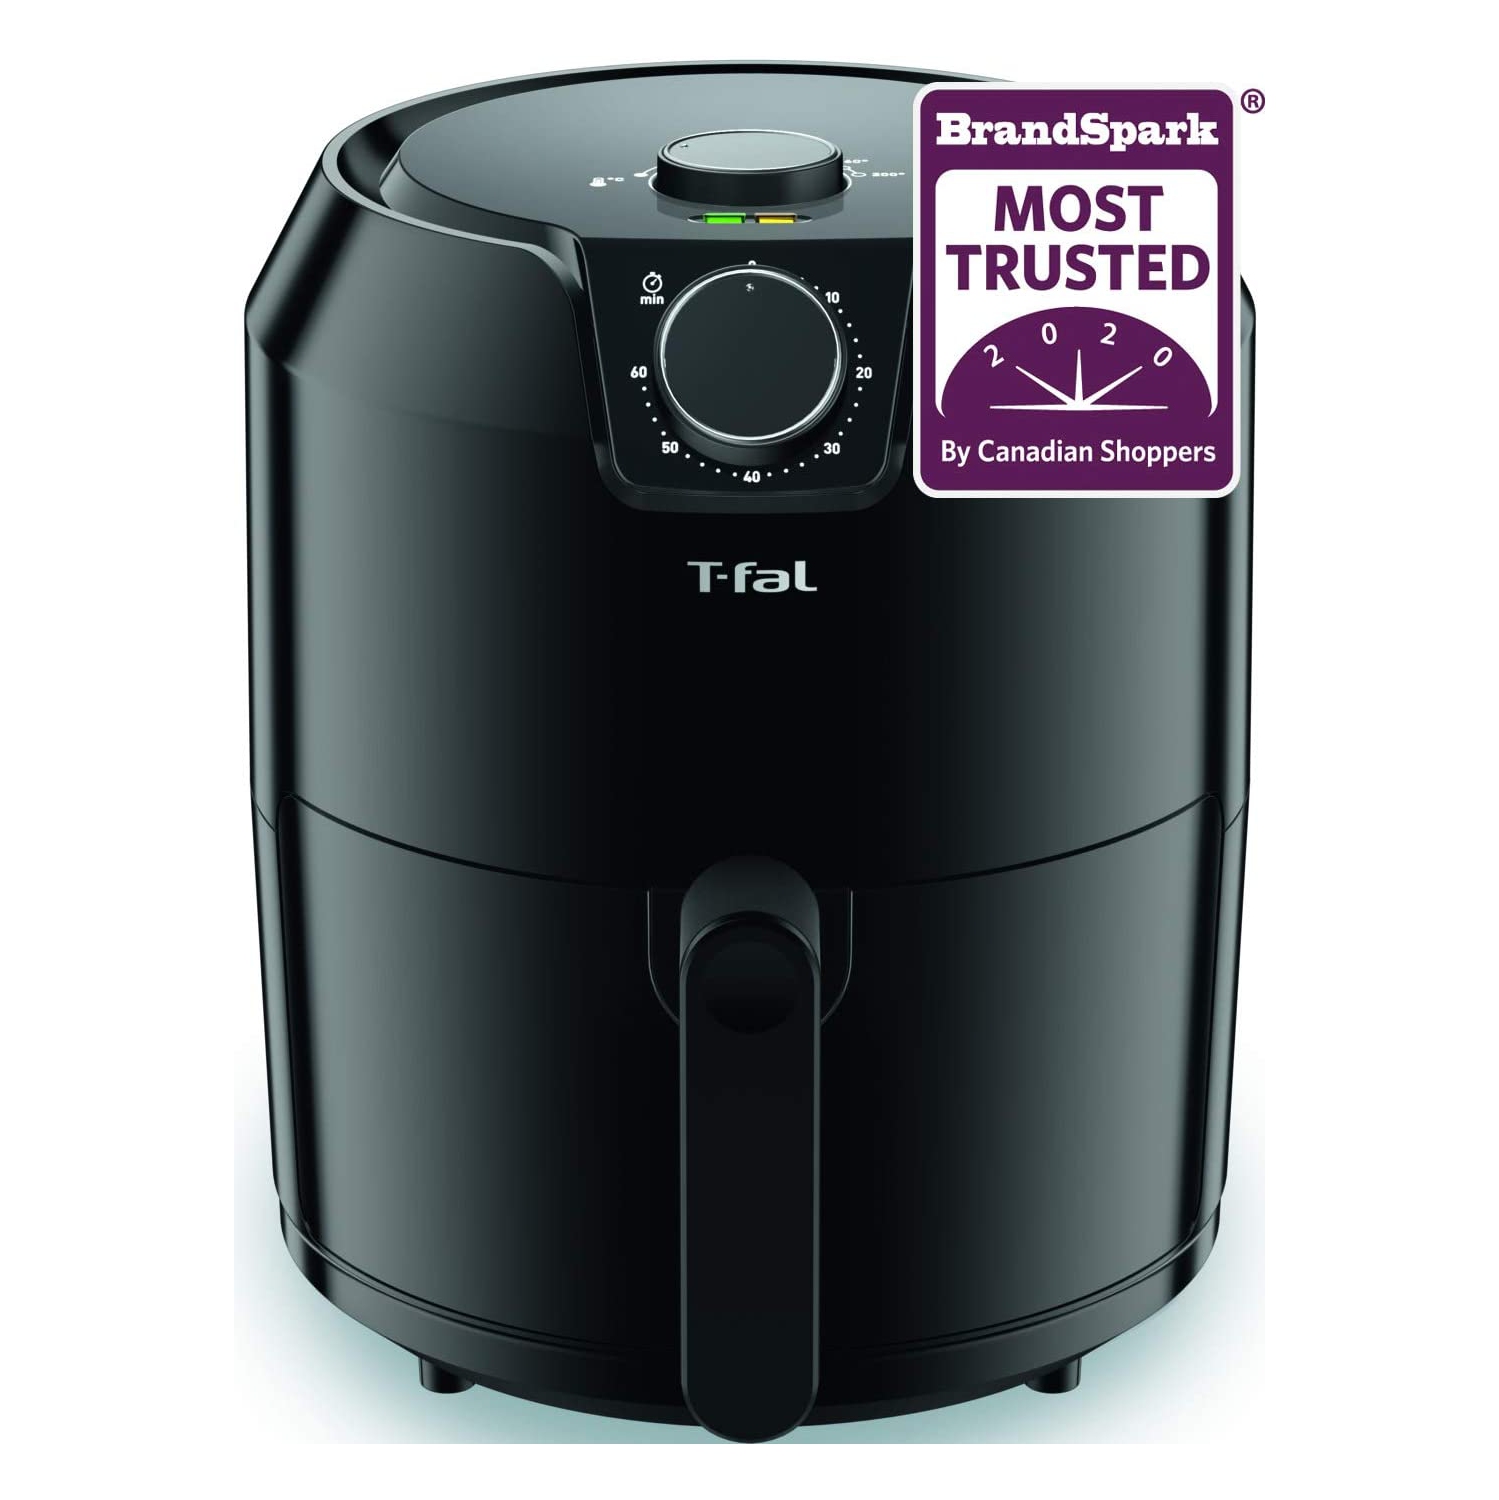 T-Fal EY201850 T-fal Easy Fry XL Air Fryer, Low Oil, Patented Basket System, 4.2L, Black